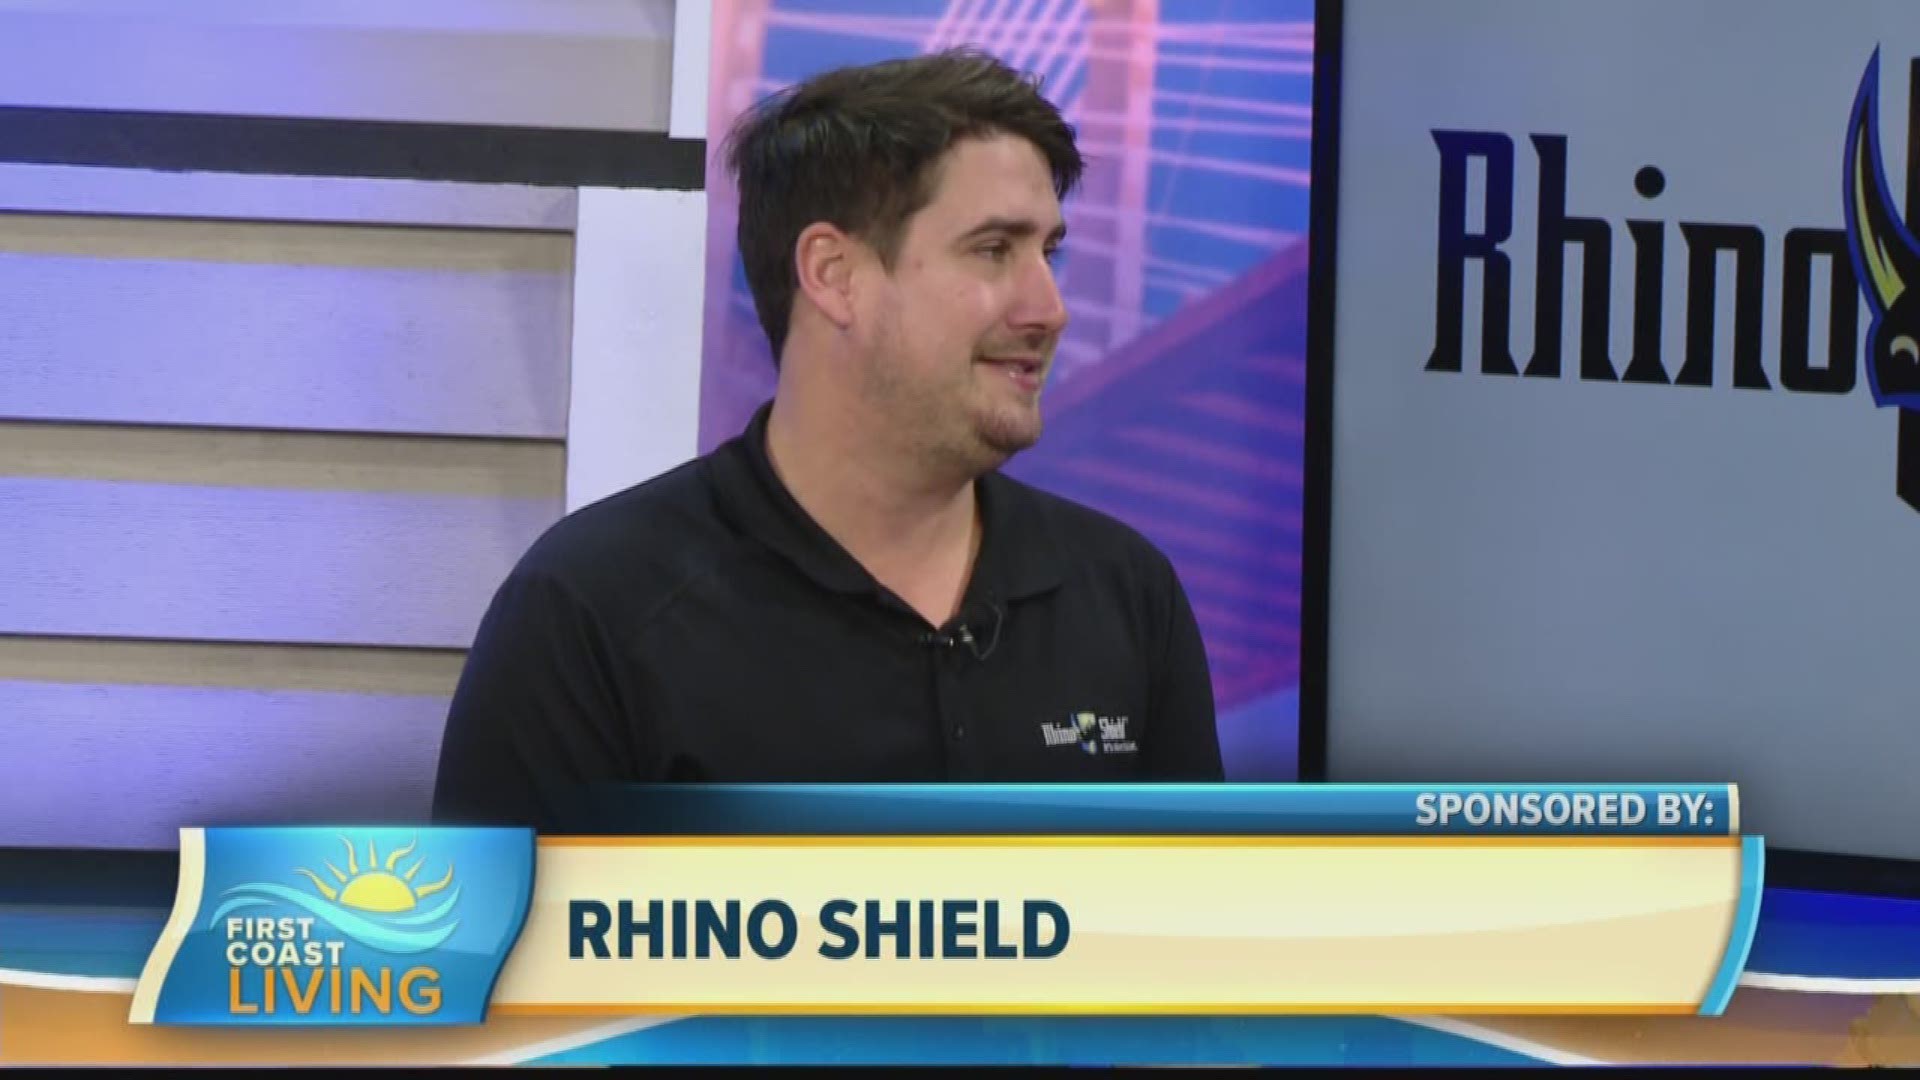 The Rhino Shield team will update the look of your home from start to finish just in time for Summer.